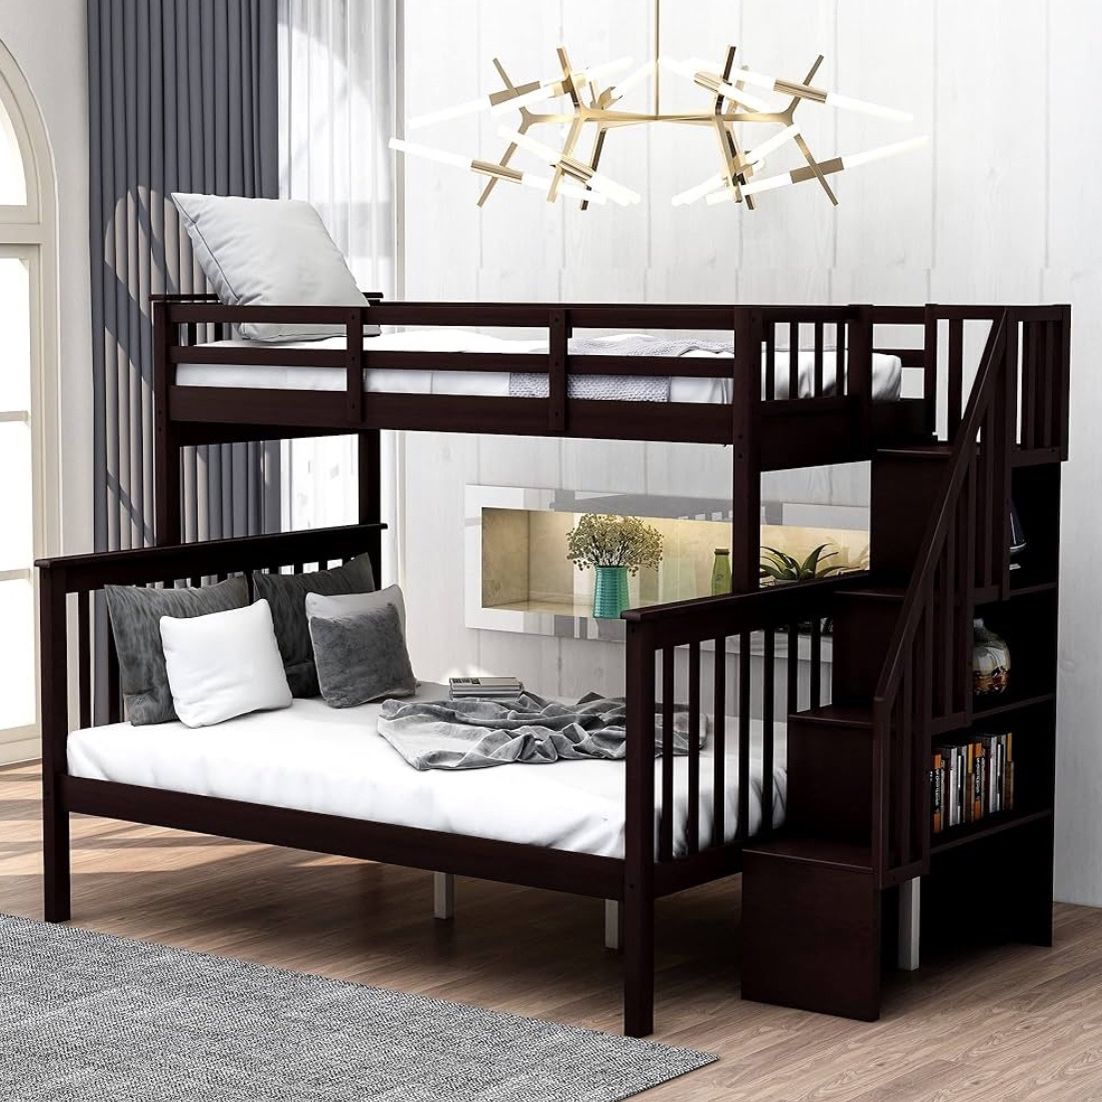 Espresso Twin Over Full Bunk Bed with Staircase Bookshelf  [NEW IN BOX] **Retails for $799 ^Assembly Required^ 